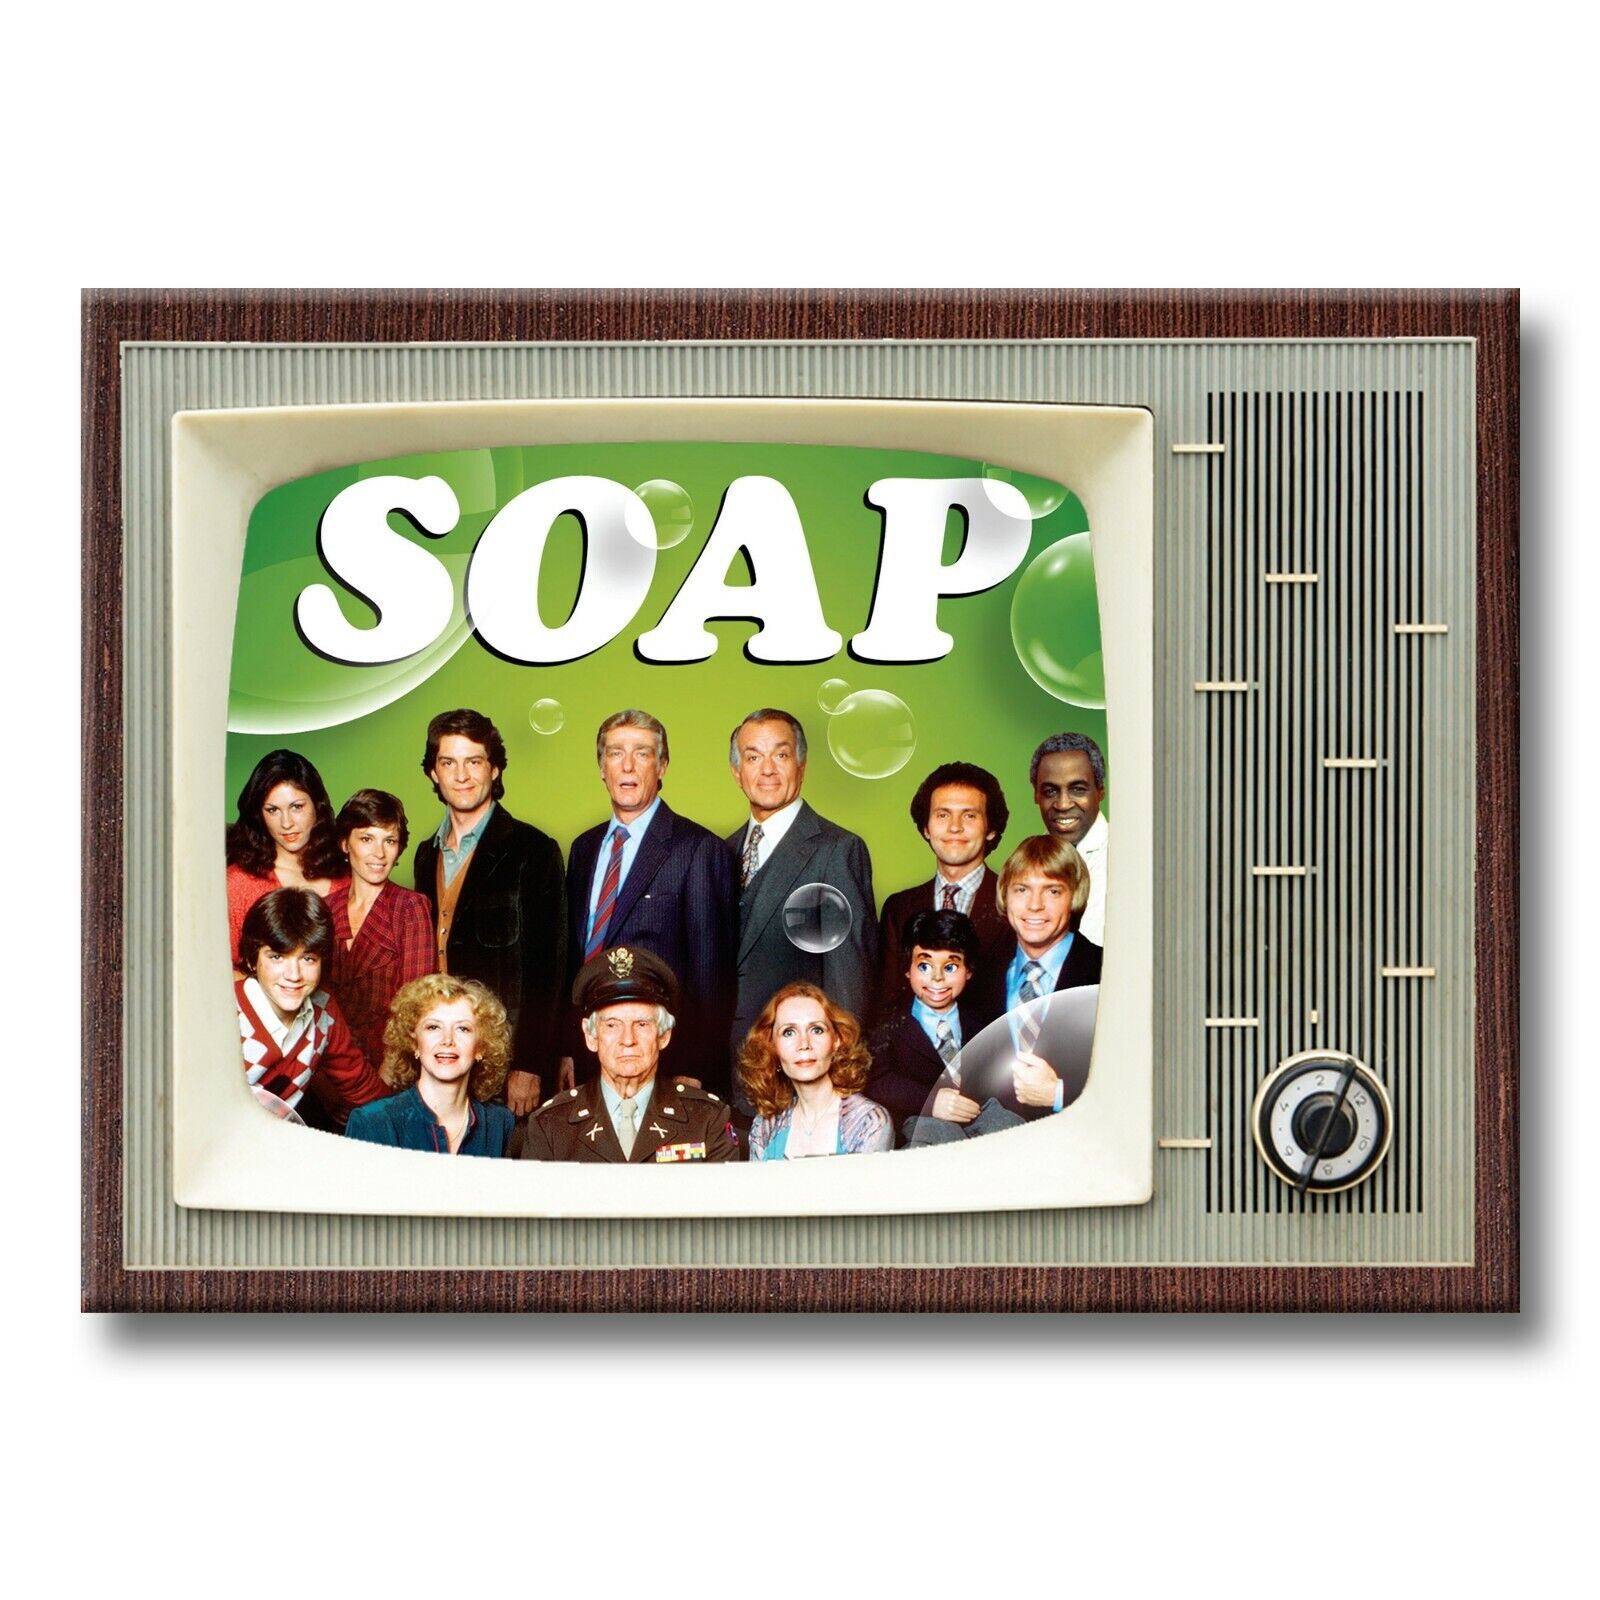 SOAP TV SHOW Classic TV 3.5 inches x 2.5 inches Steel FRIDGE MAGNET